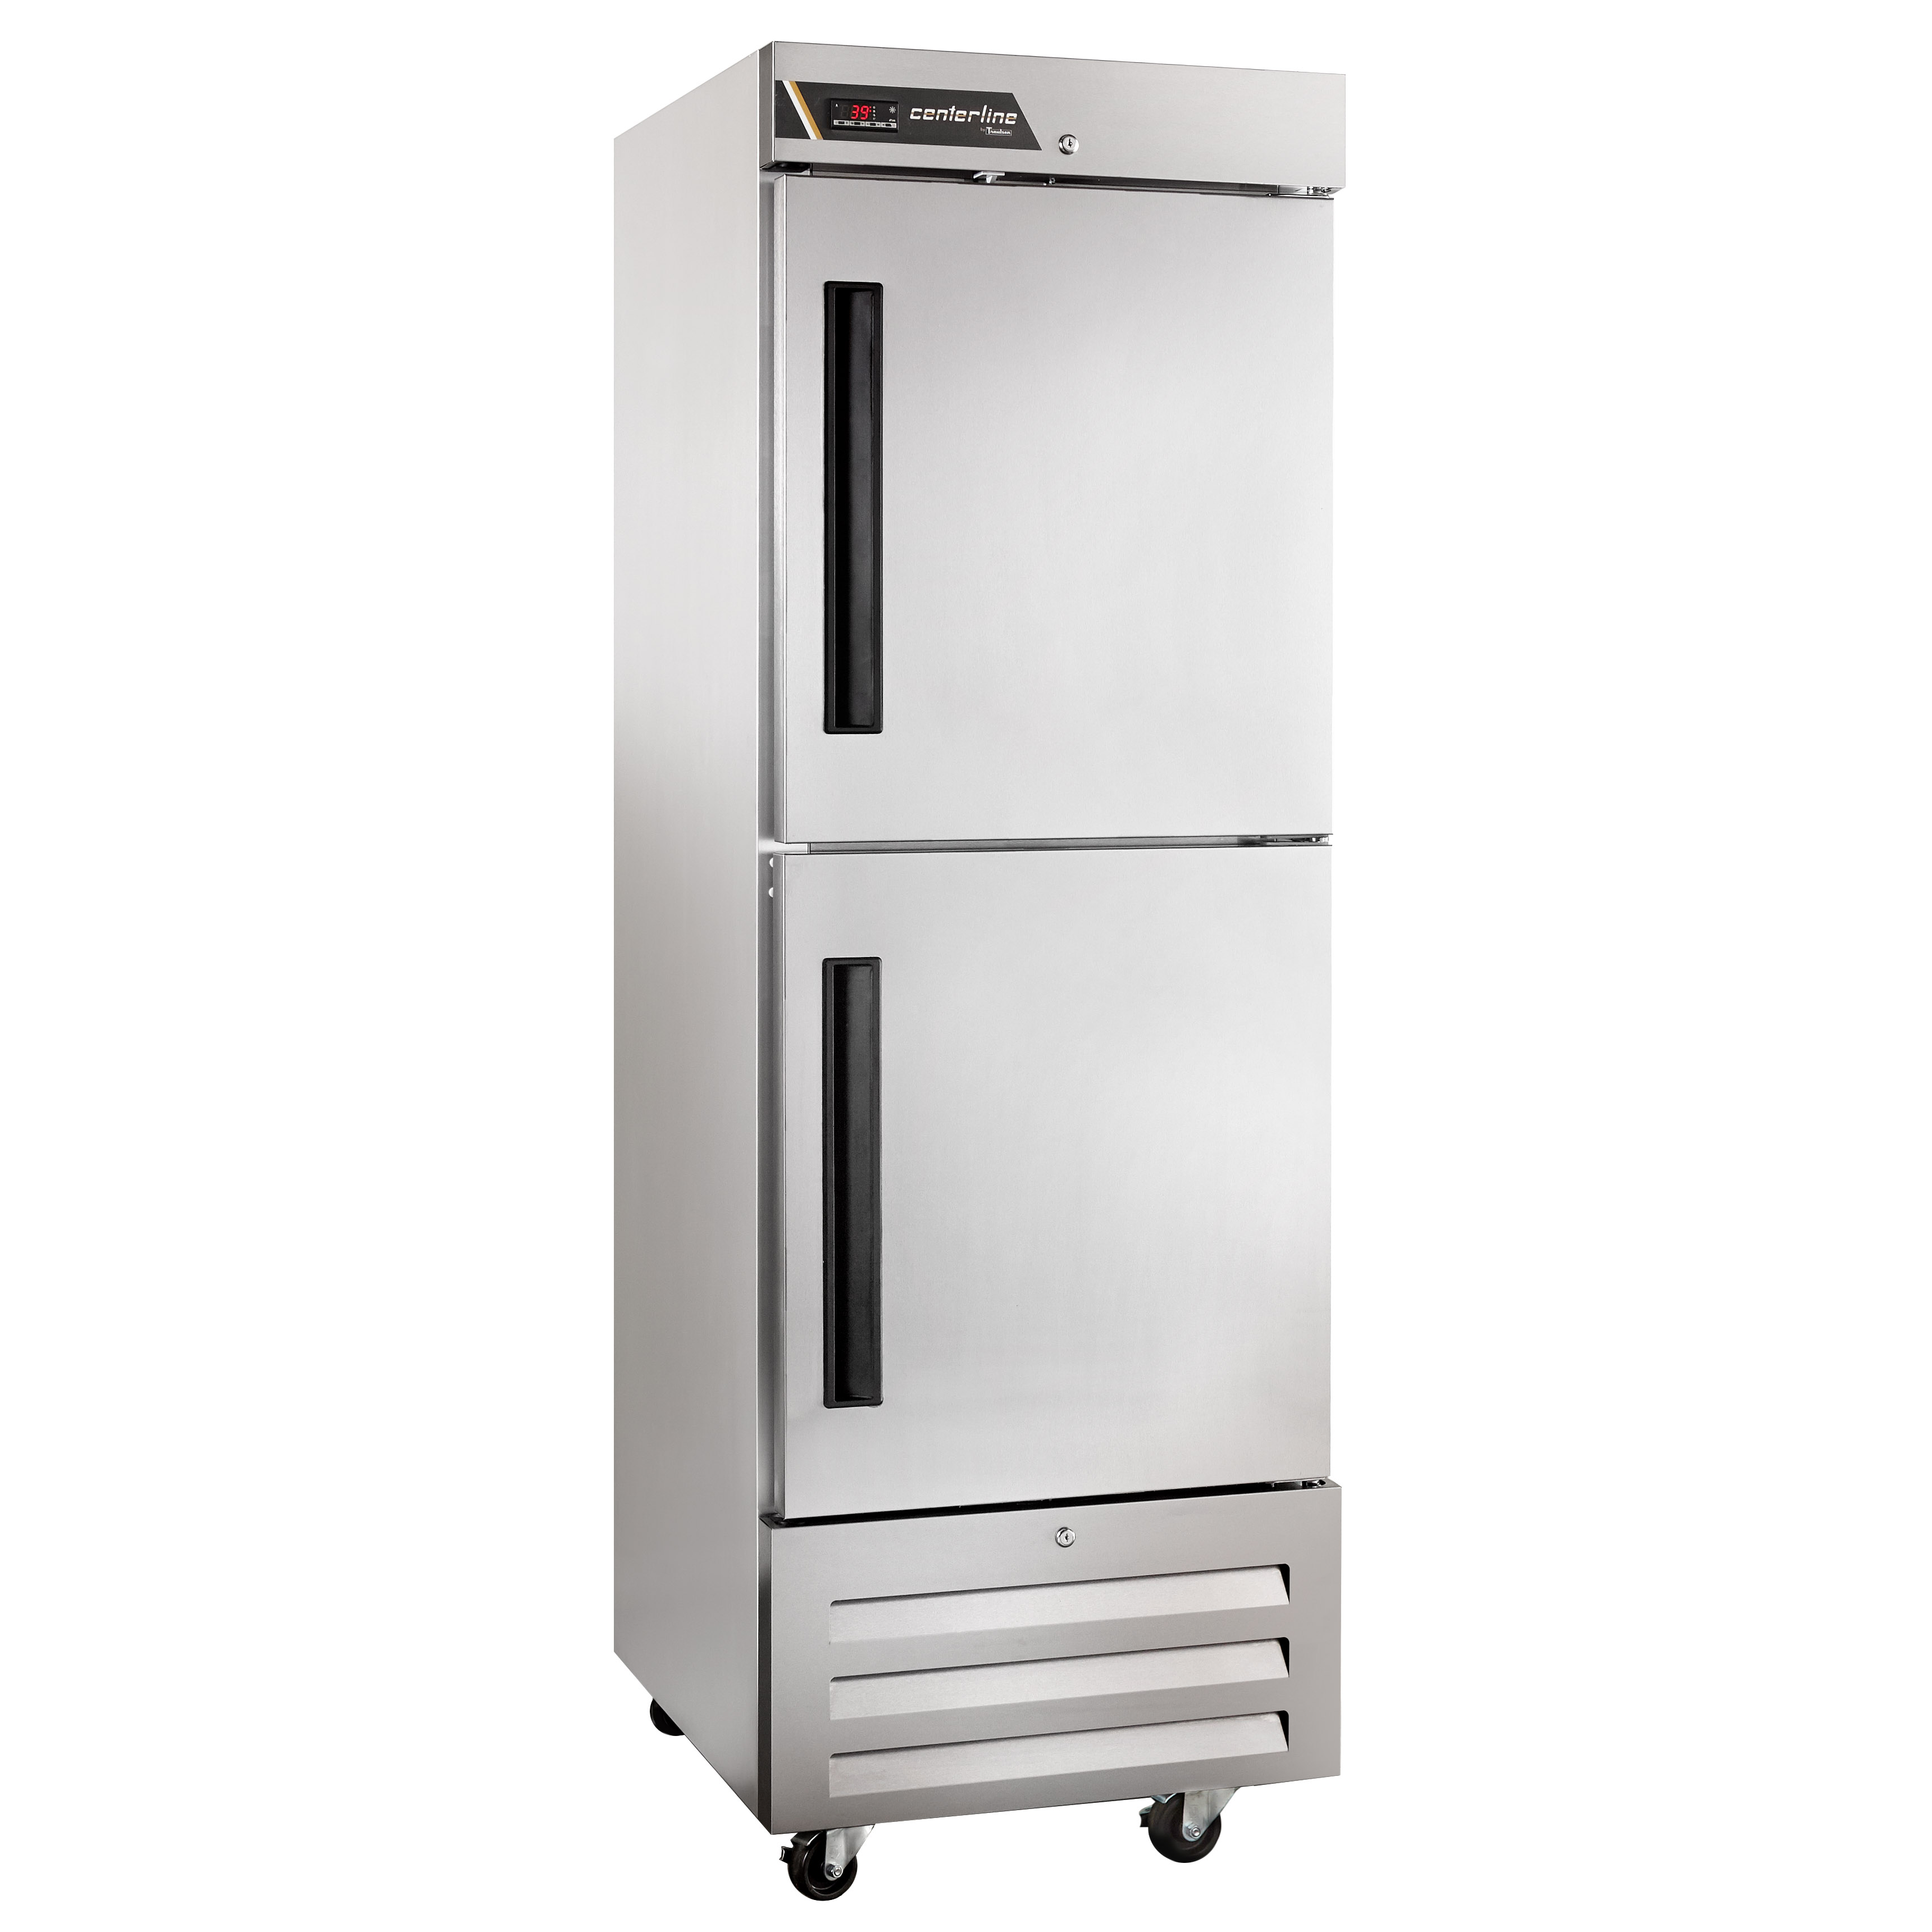 Traulsen CLBM-23R-HS-L One Section Solid Door Reach-In Refrigerator, 20.5 cu. ft.